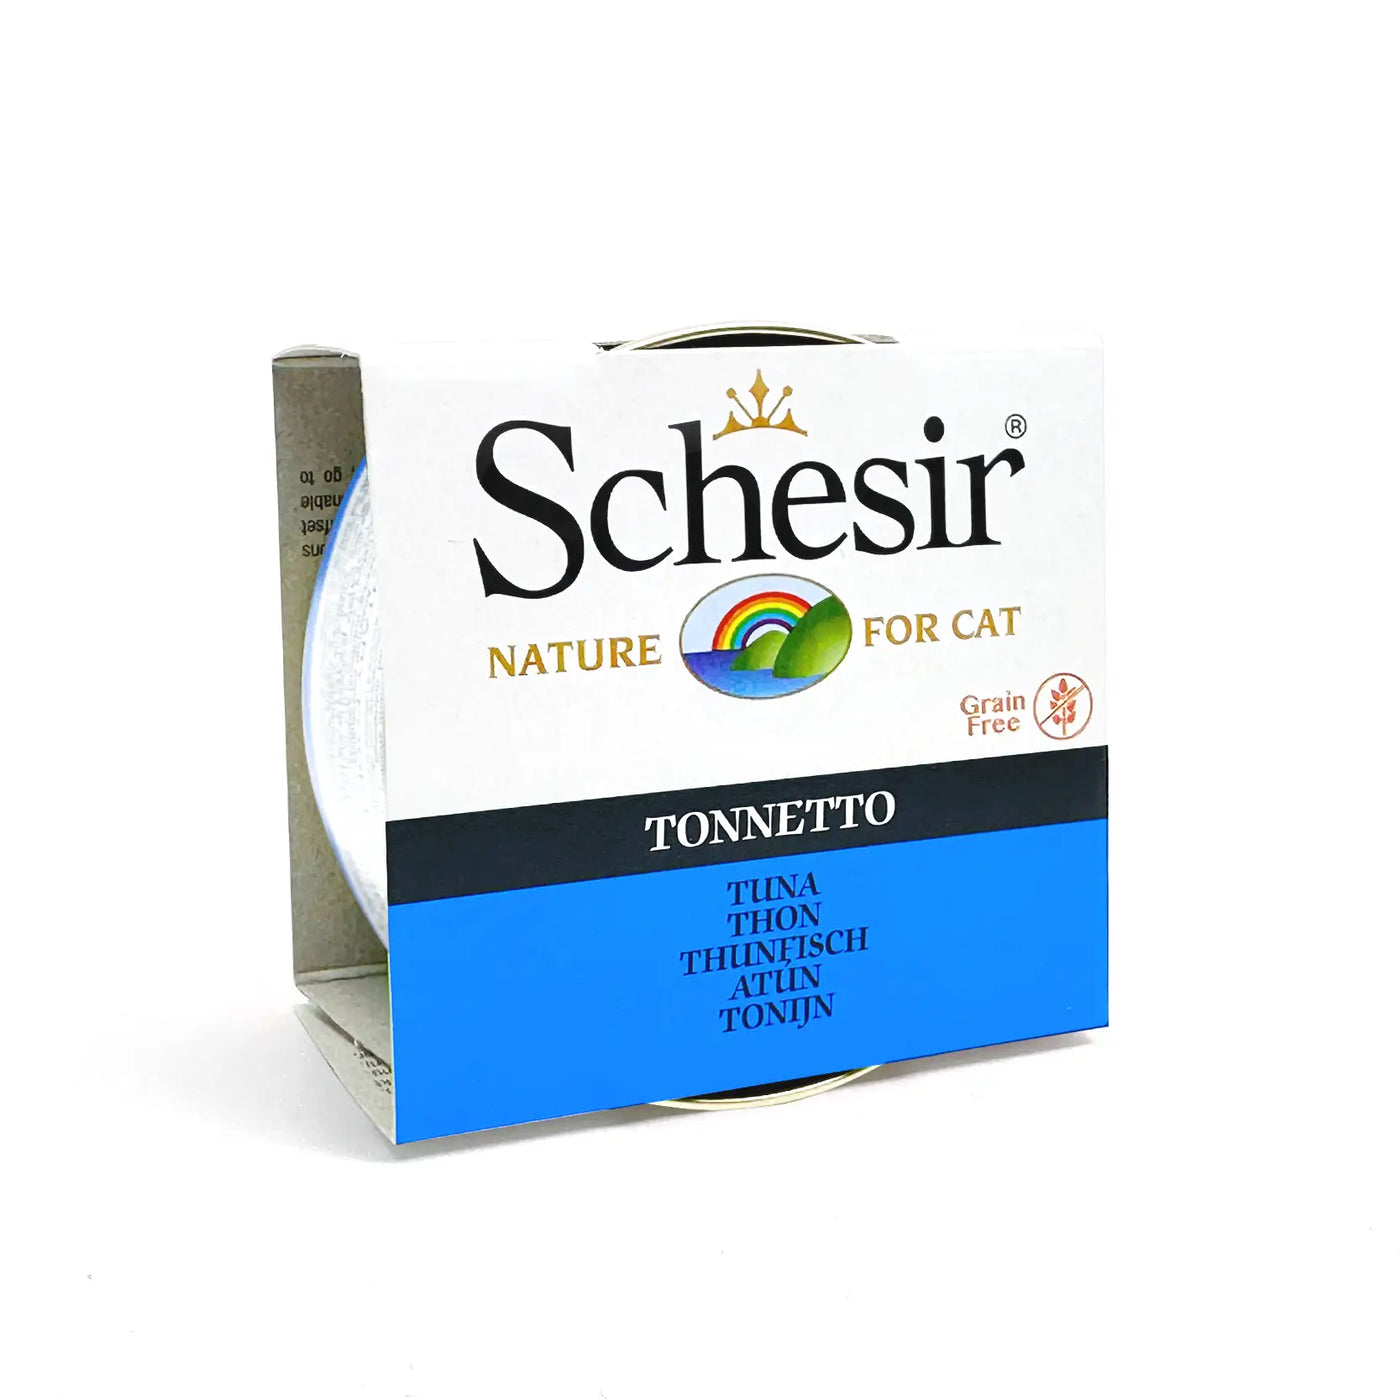 Schesir - Complementary Wet Food For Adult Cats - Tuna 85g